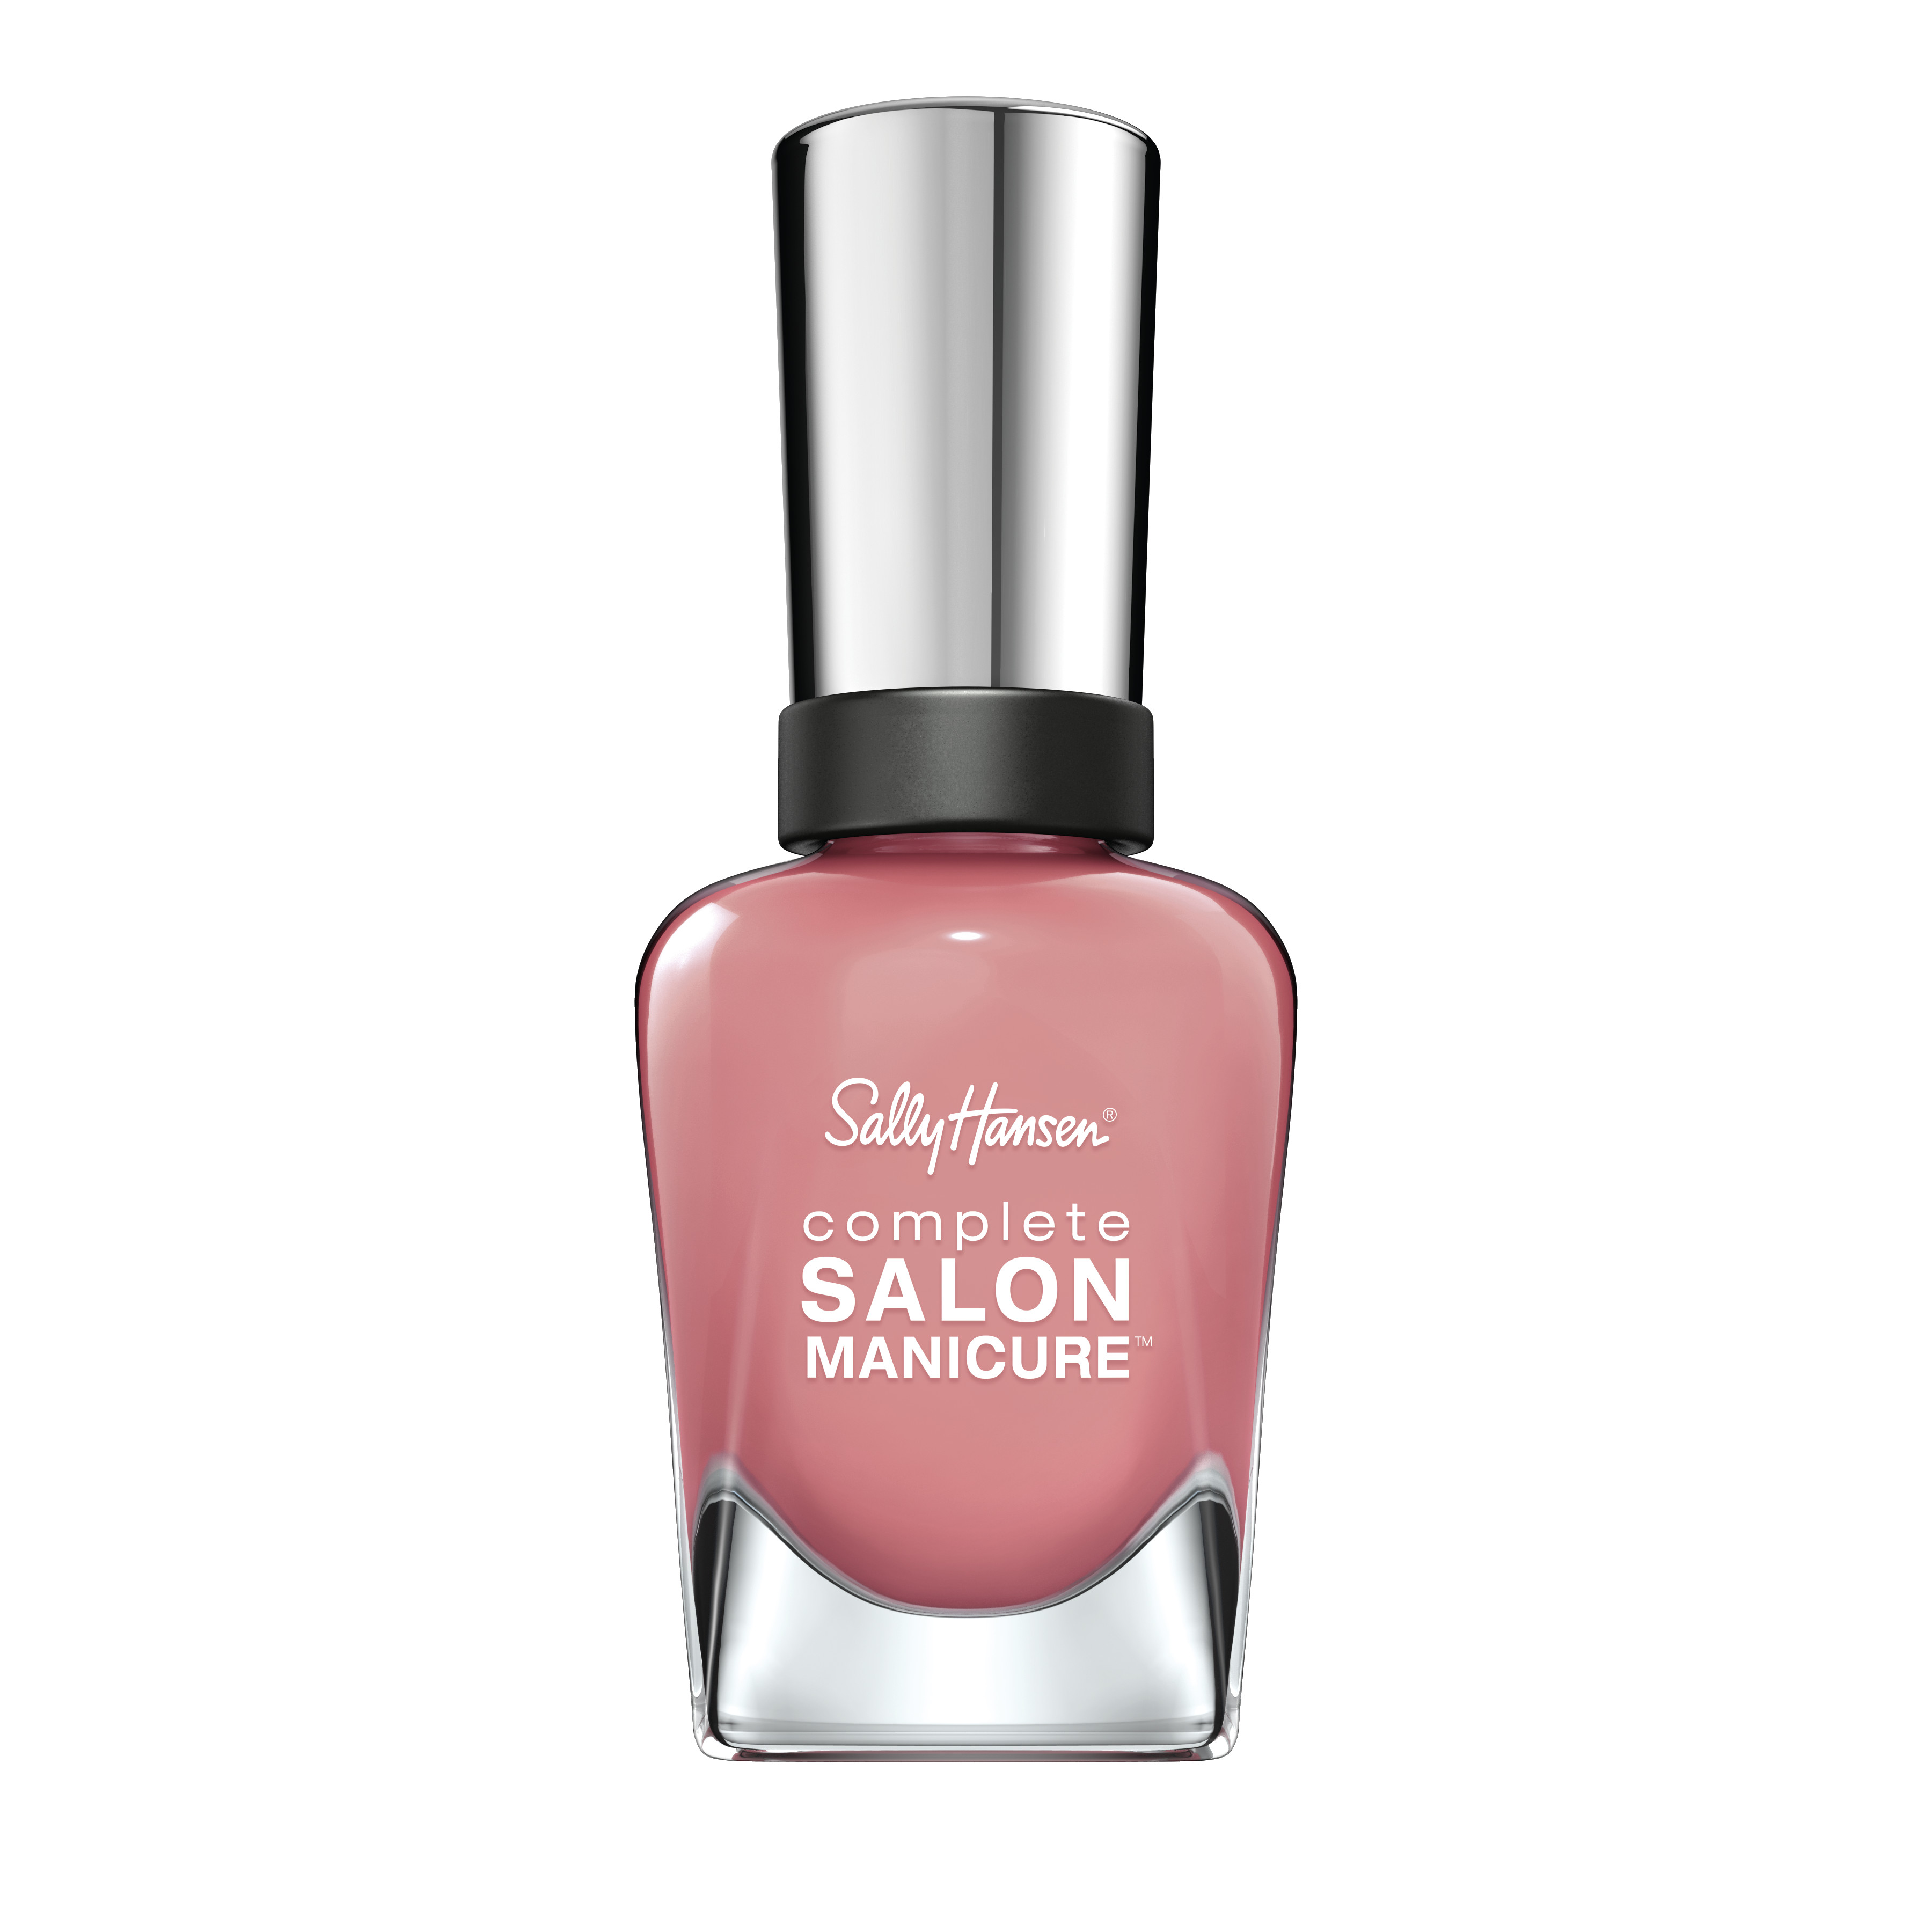 Sally Hansen Complete Salon Manicure Nail Color, Pink Pong - image 1 of 2